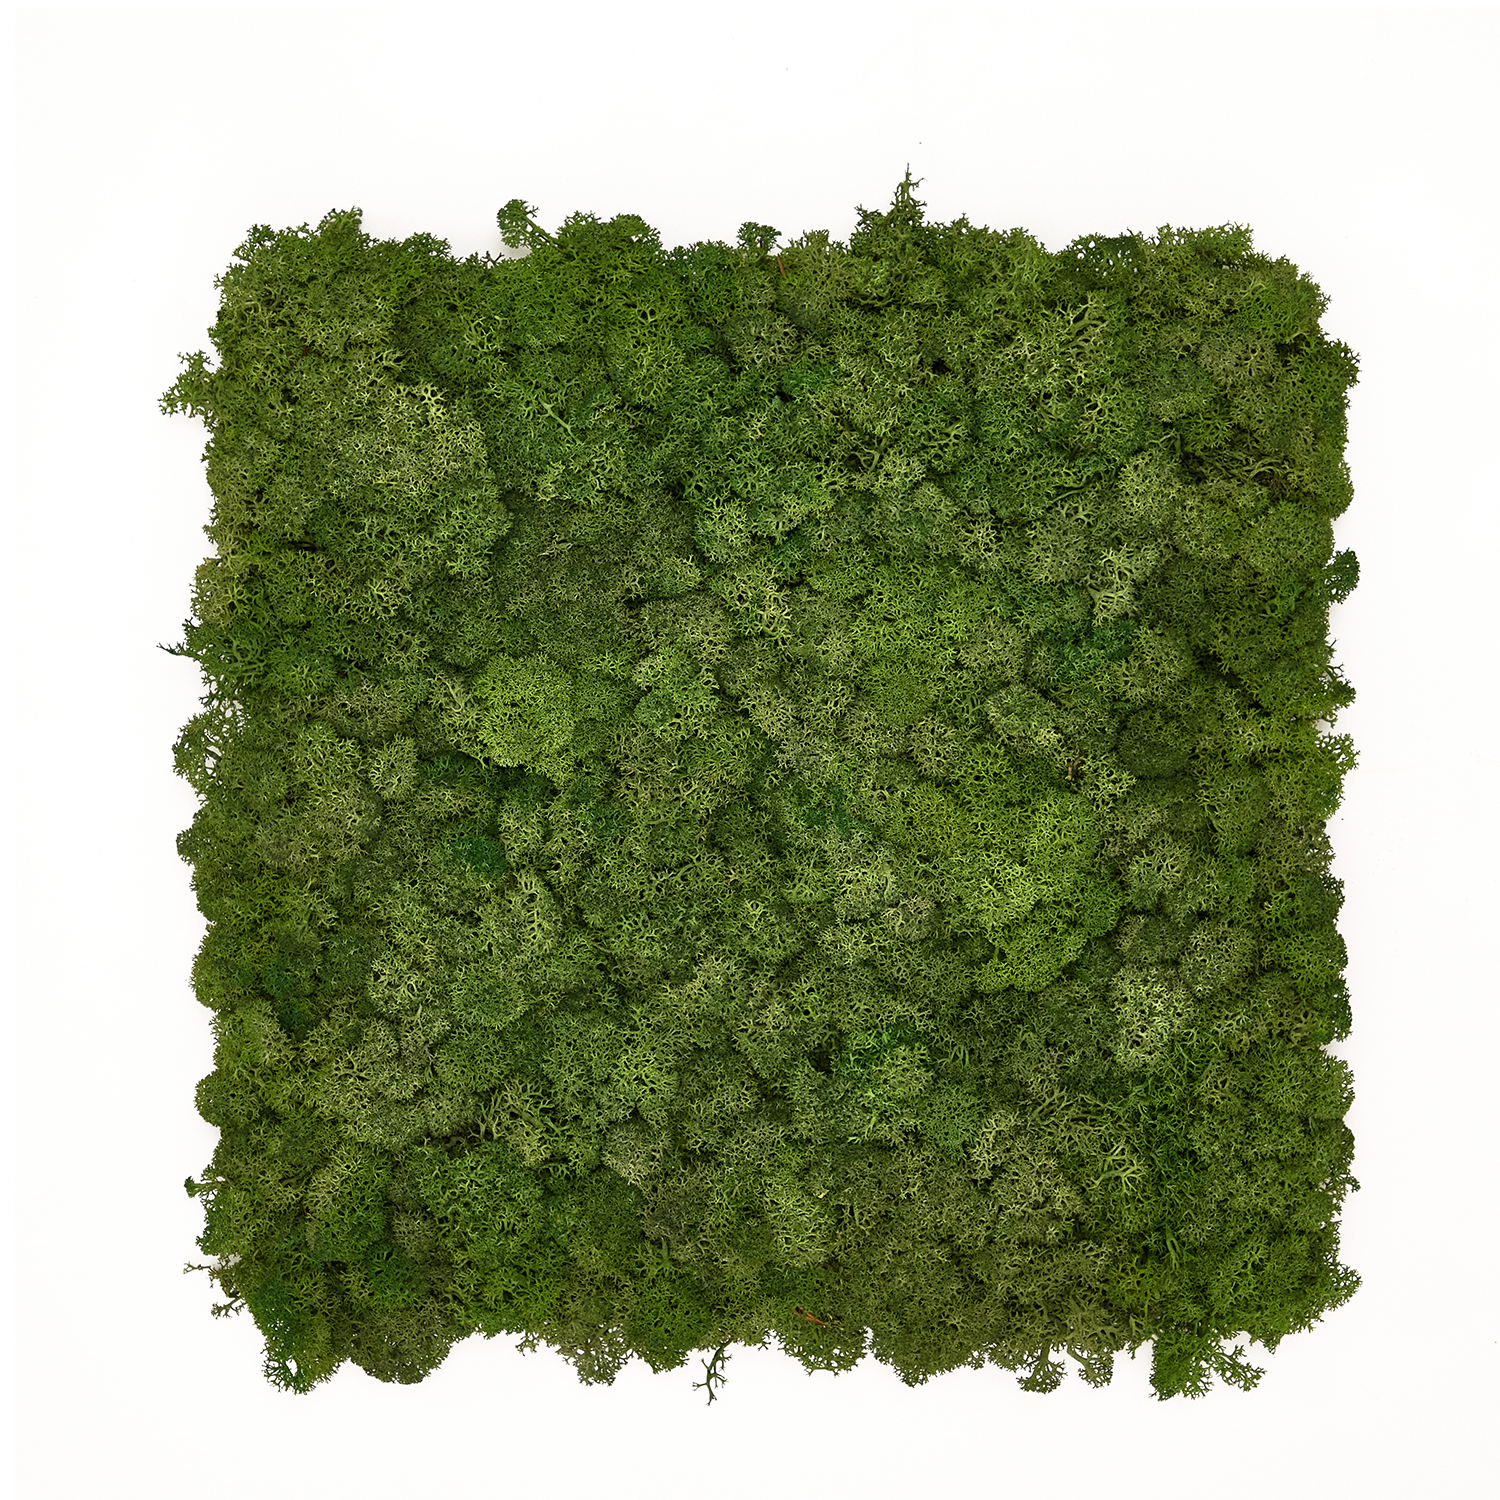 [Moss Wall Panels]SCANDIAMOSS-Tile, Functionality Wall PanelAL-300*300(Color-Moss Green)Decorative Wall Panel, Organic Decorating, Living Wall Plants Indoor, Sound Absorption, Living Wall Decor, Preserved Moss